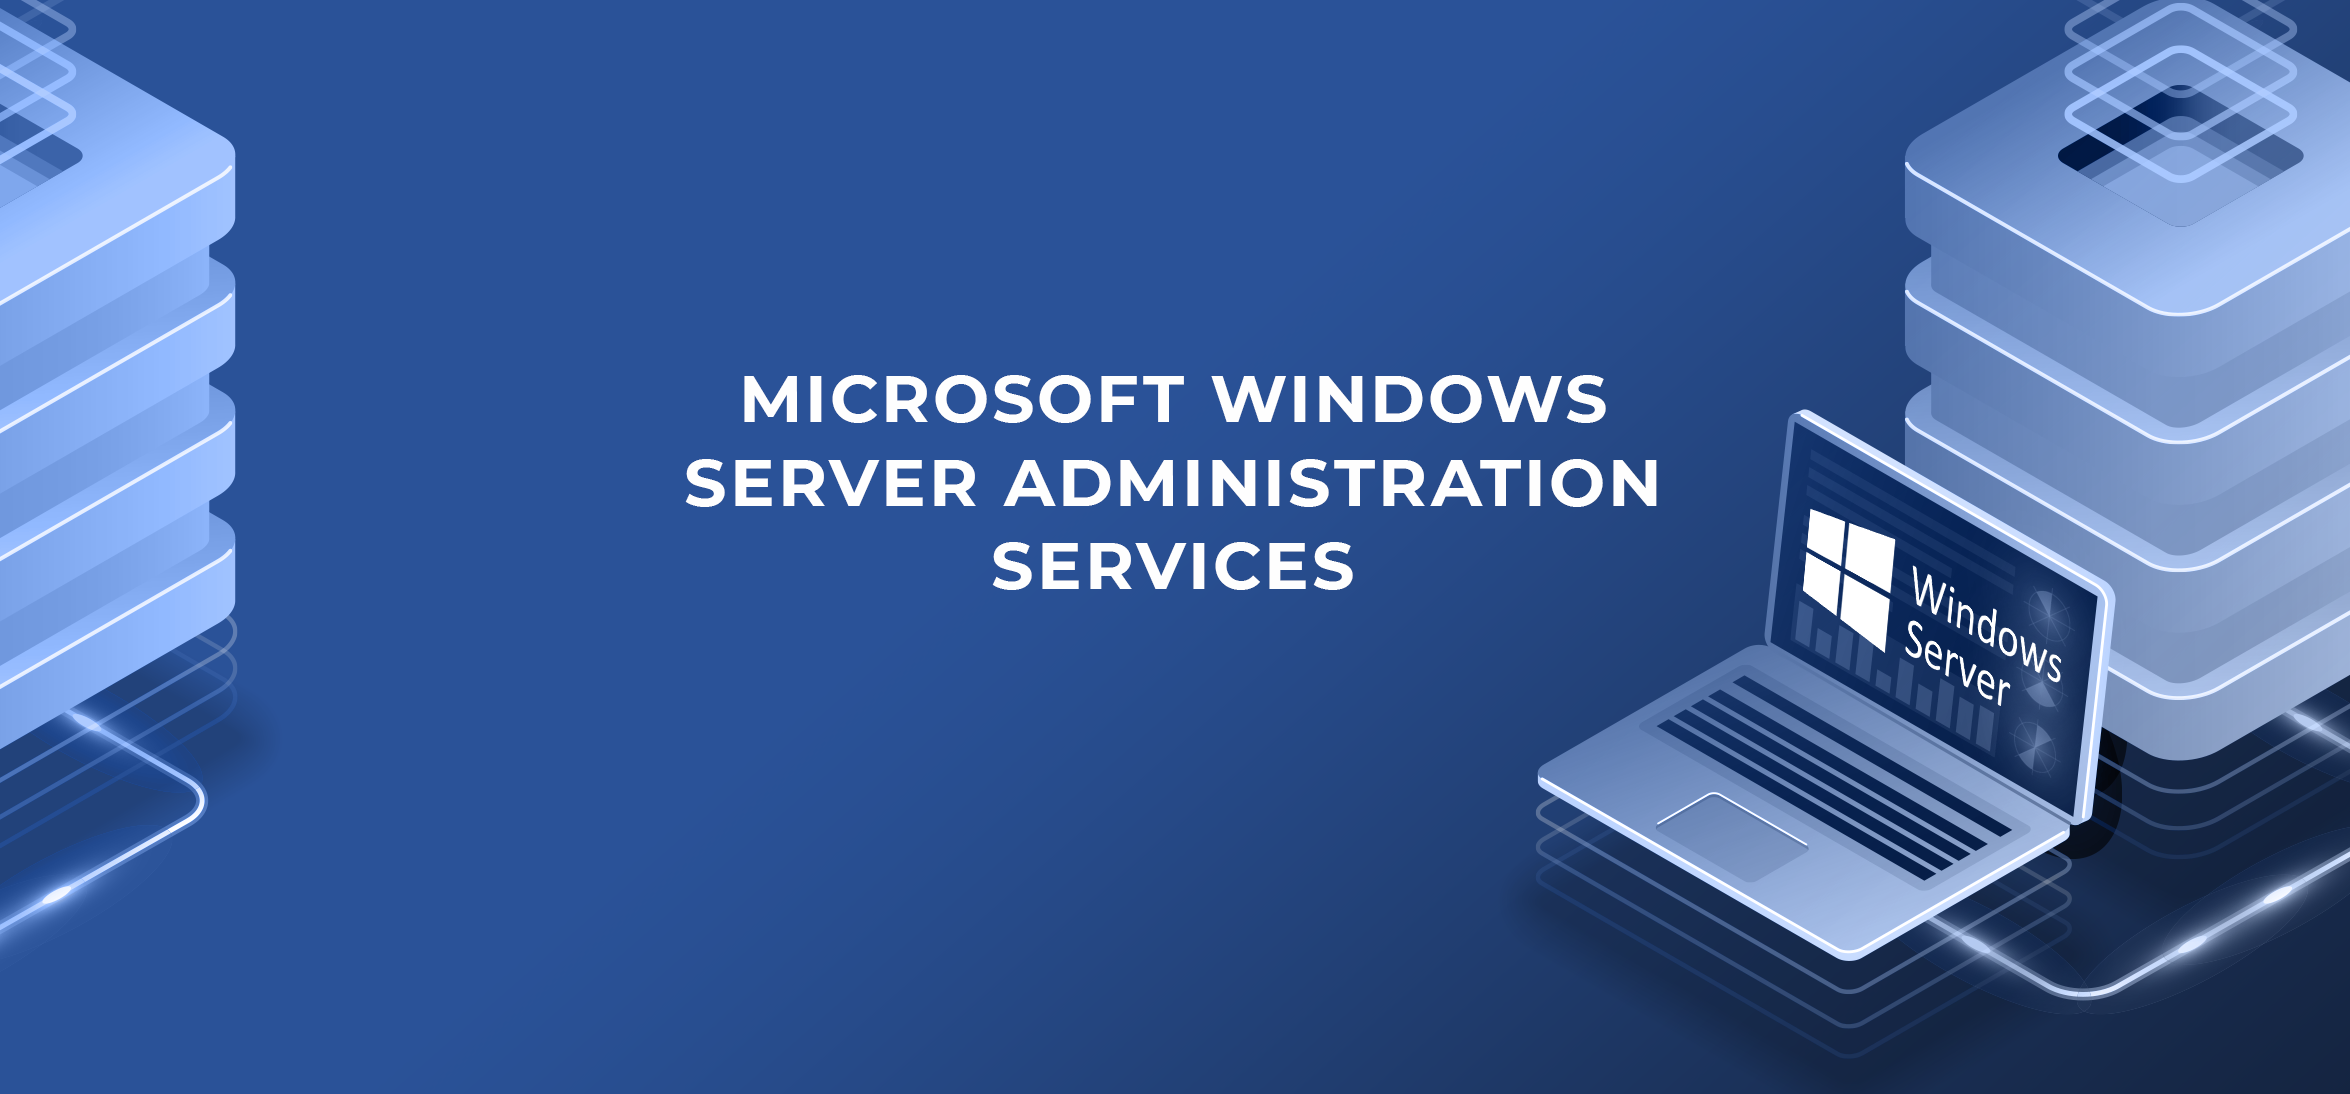 Effective Windows Server Administration and Support Solution Provider in Manasquan NJ, 08736